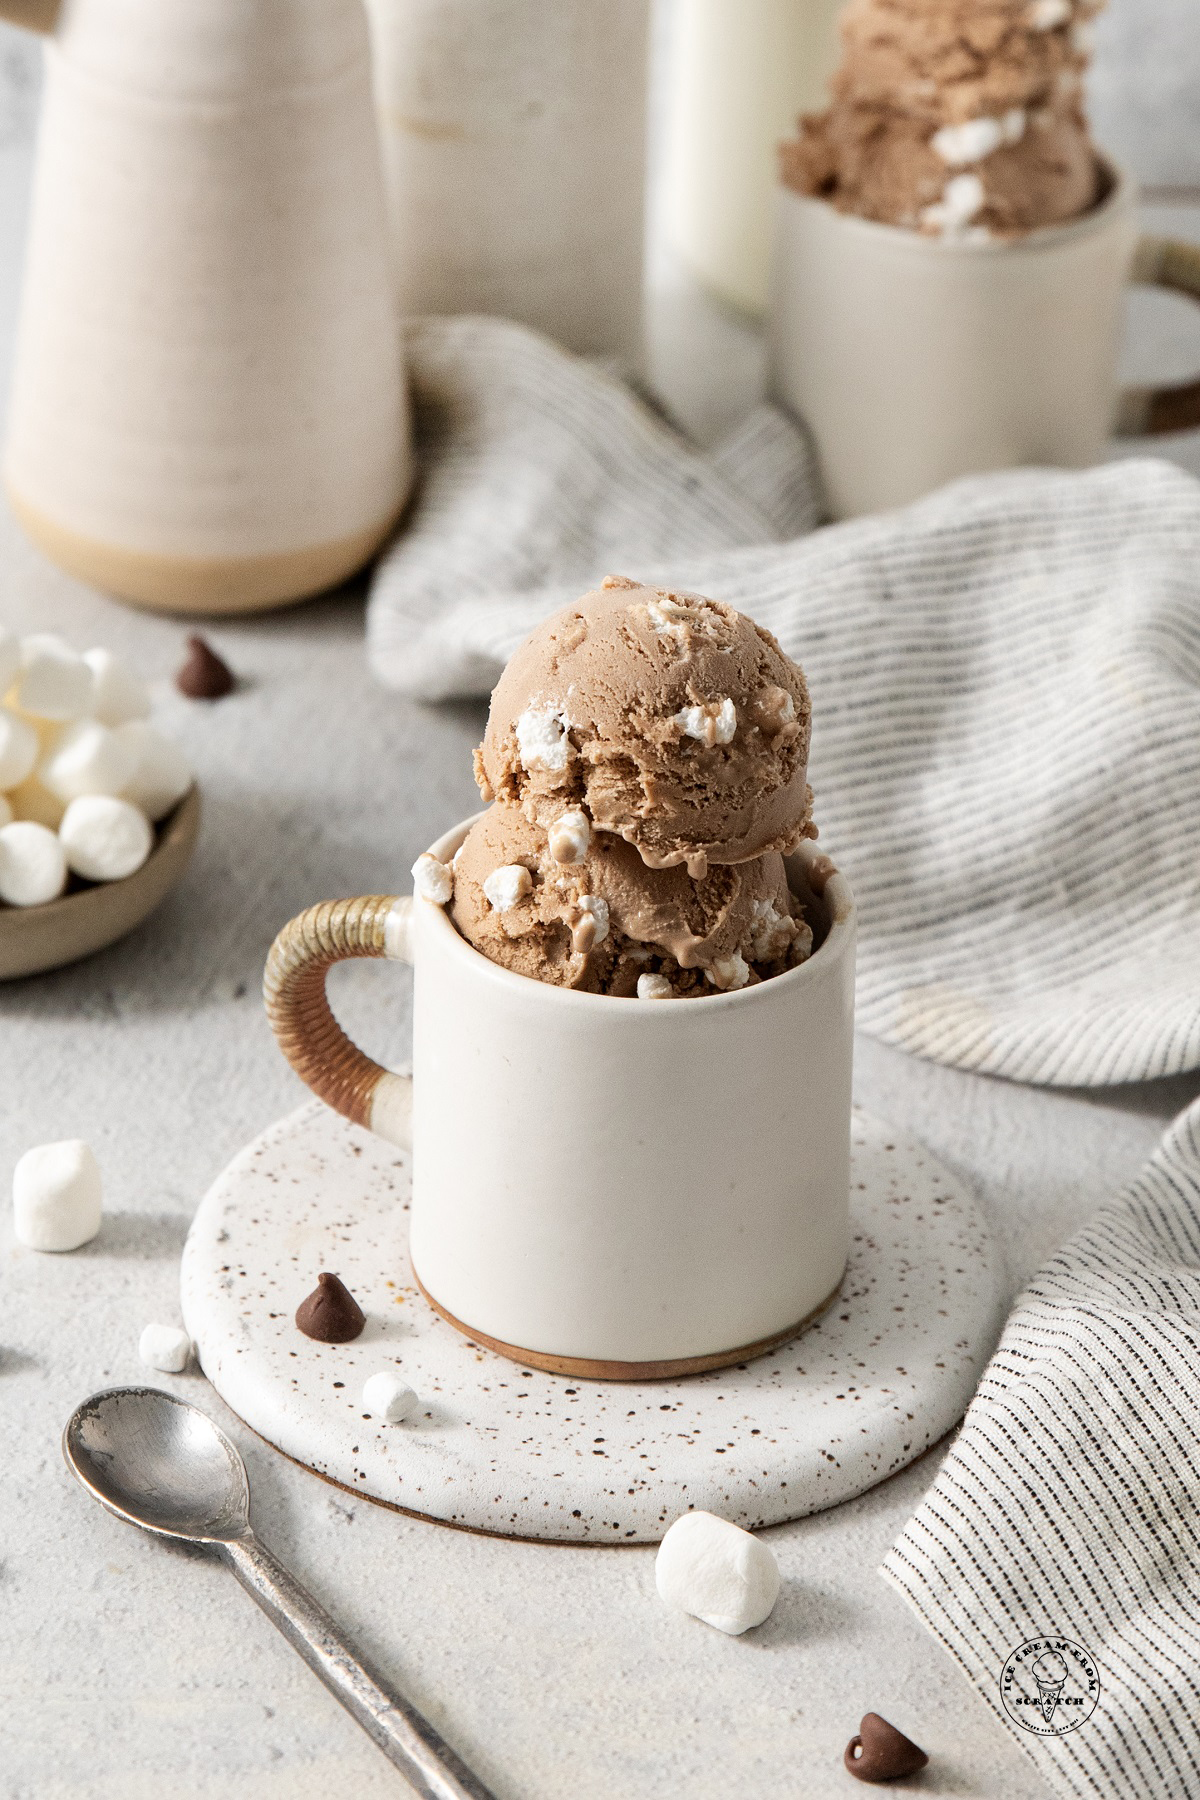 a whiter ceramic mug with a brown handle sitting on a speckled brown and white coaster, holding scooops of homemade hot chocolate ice cream. Marshmallows, chocolate chips and a small spoon are on the counter.